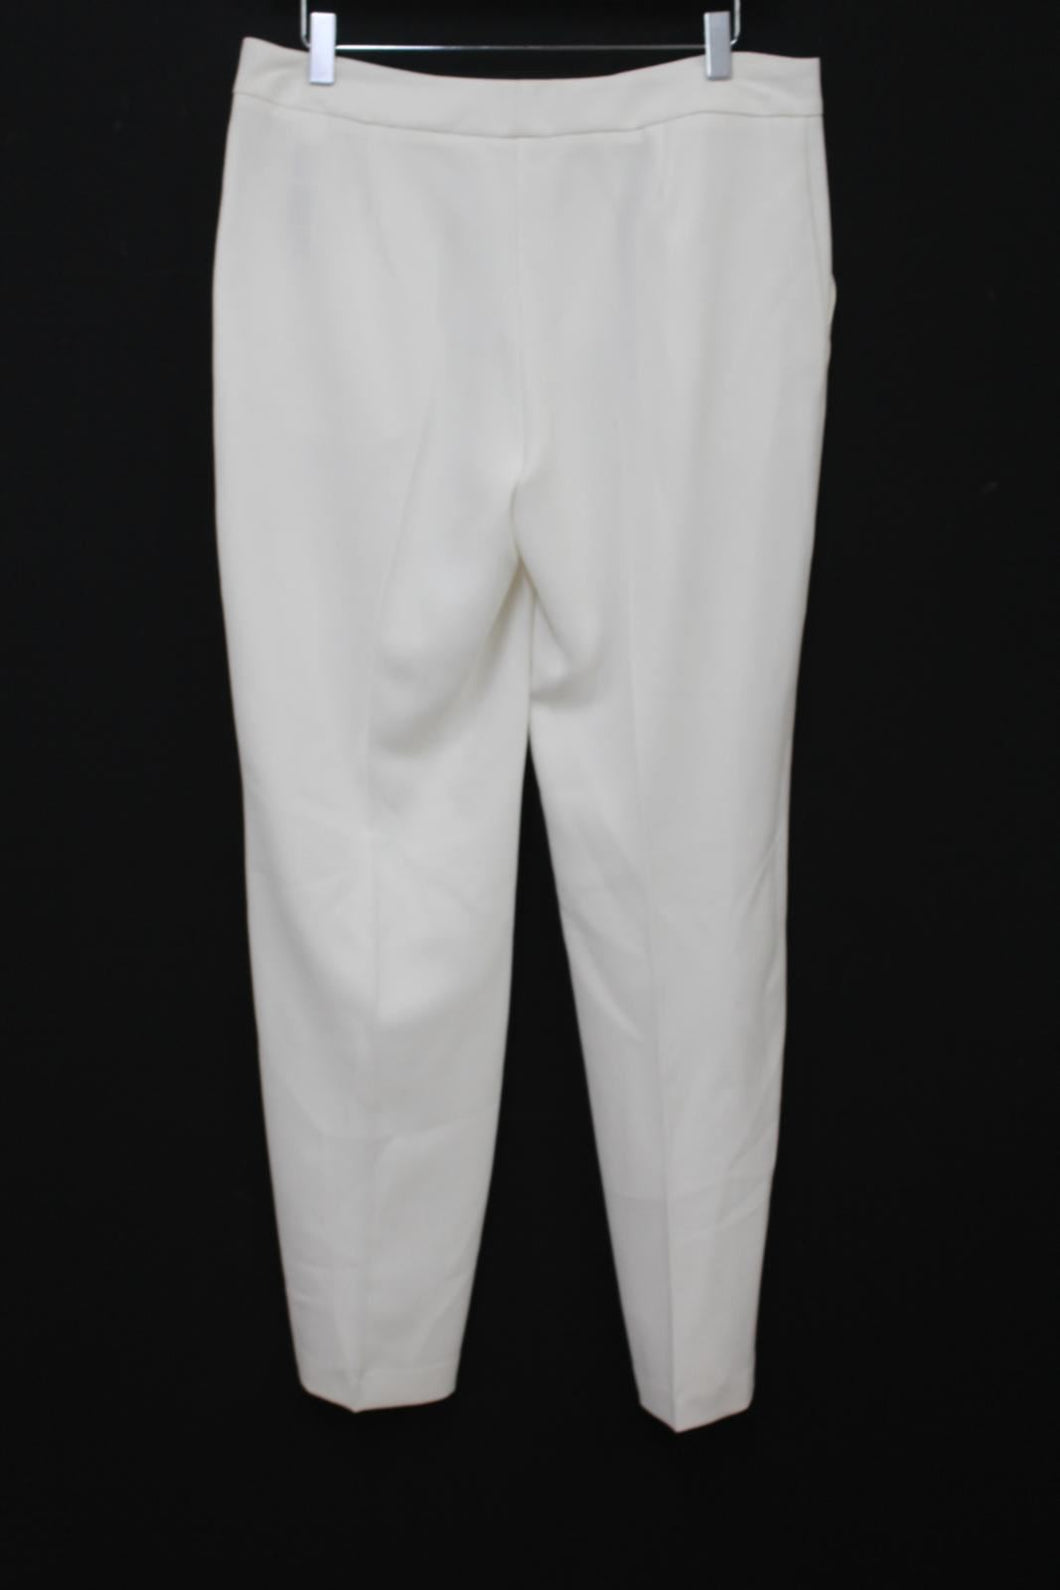 M&S Marks & Spencer Ladies Winter White Sartorial Trousers UK12 RRP39.5 NEW